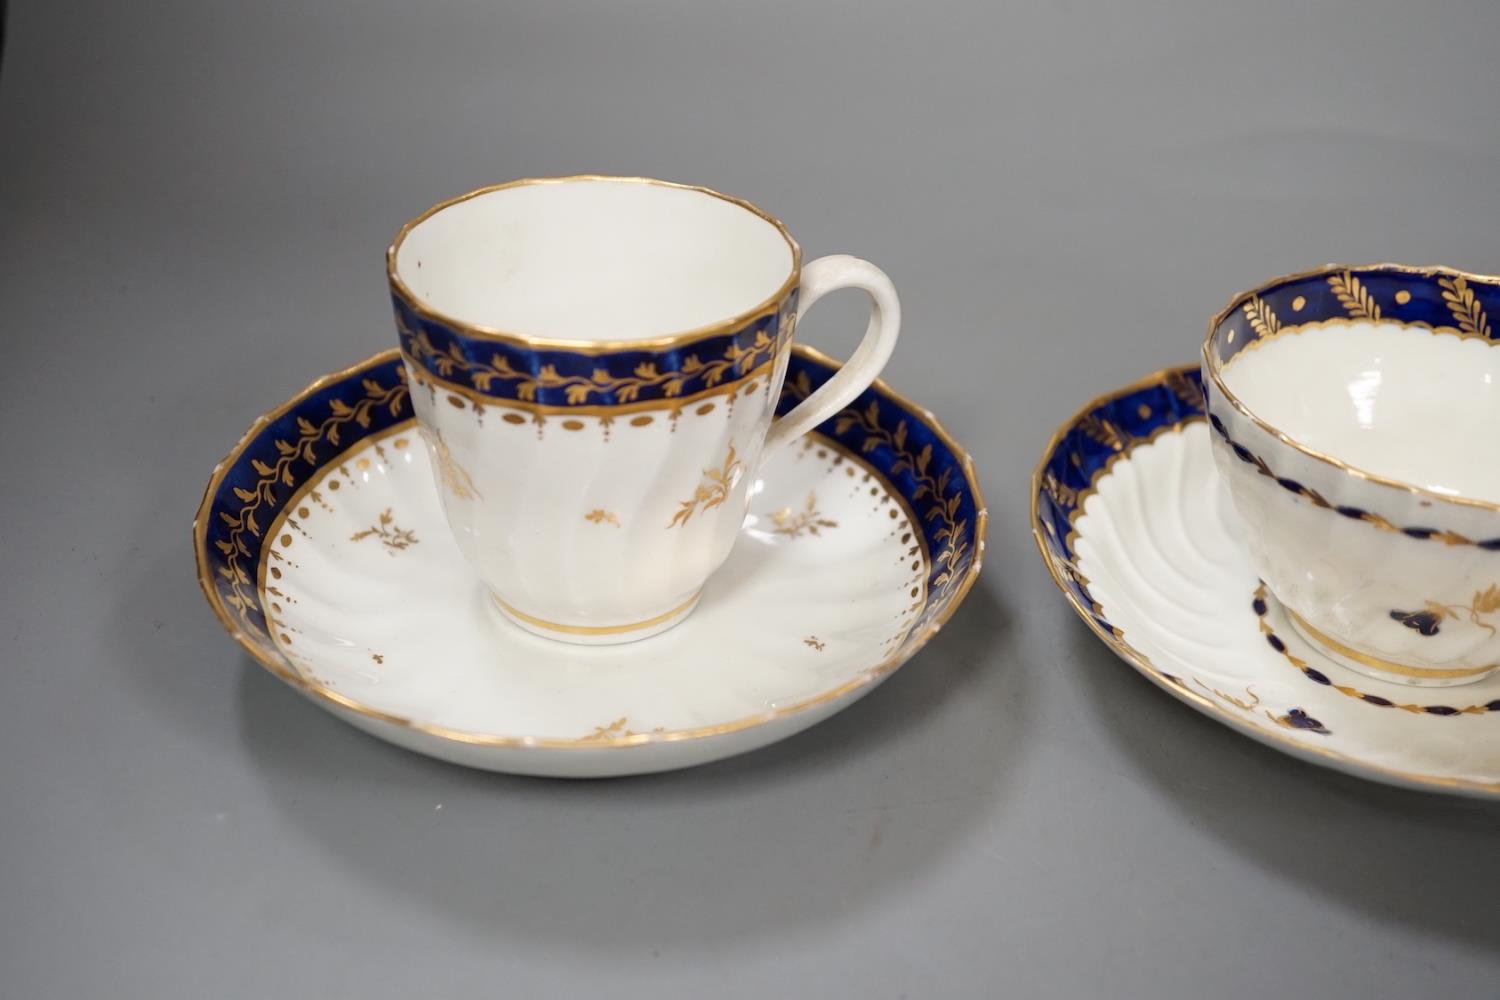 Three flight Worcester shankered teawares two coffee cup and saucers with blue borders and a teabowl - Image 9 of 14